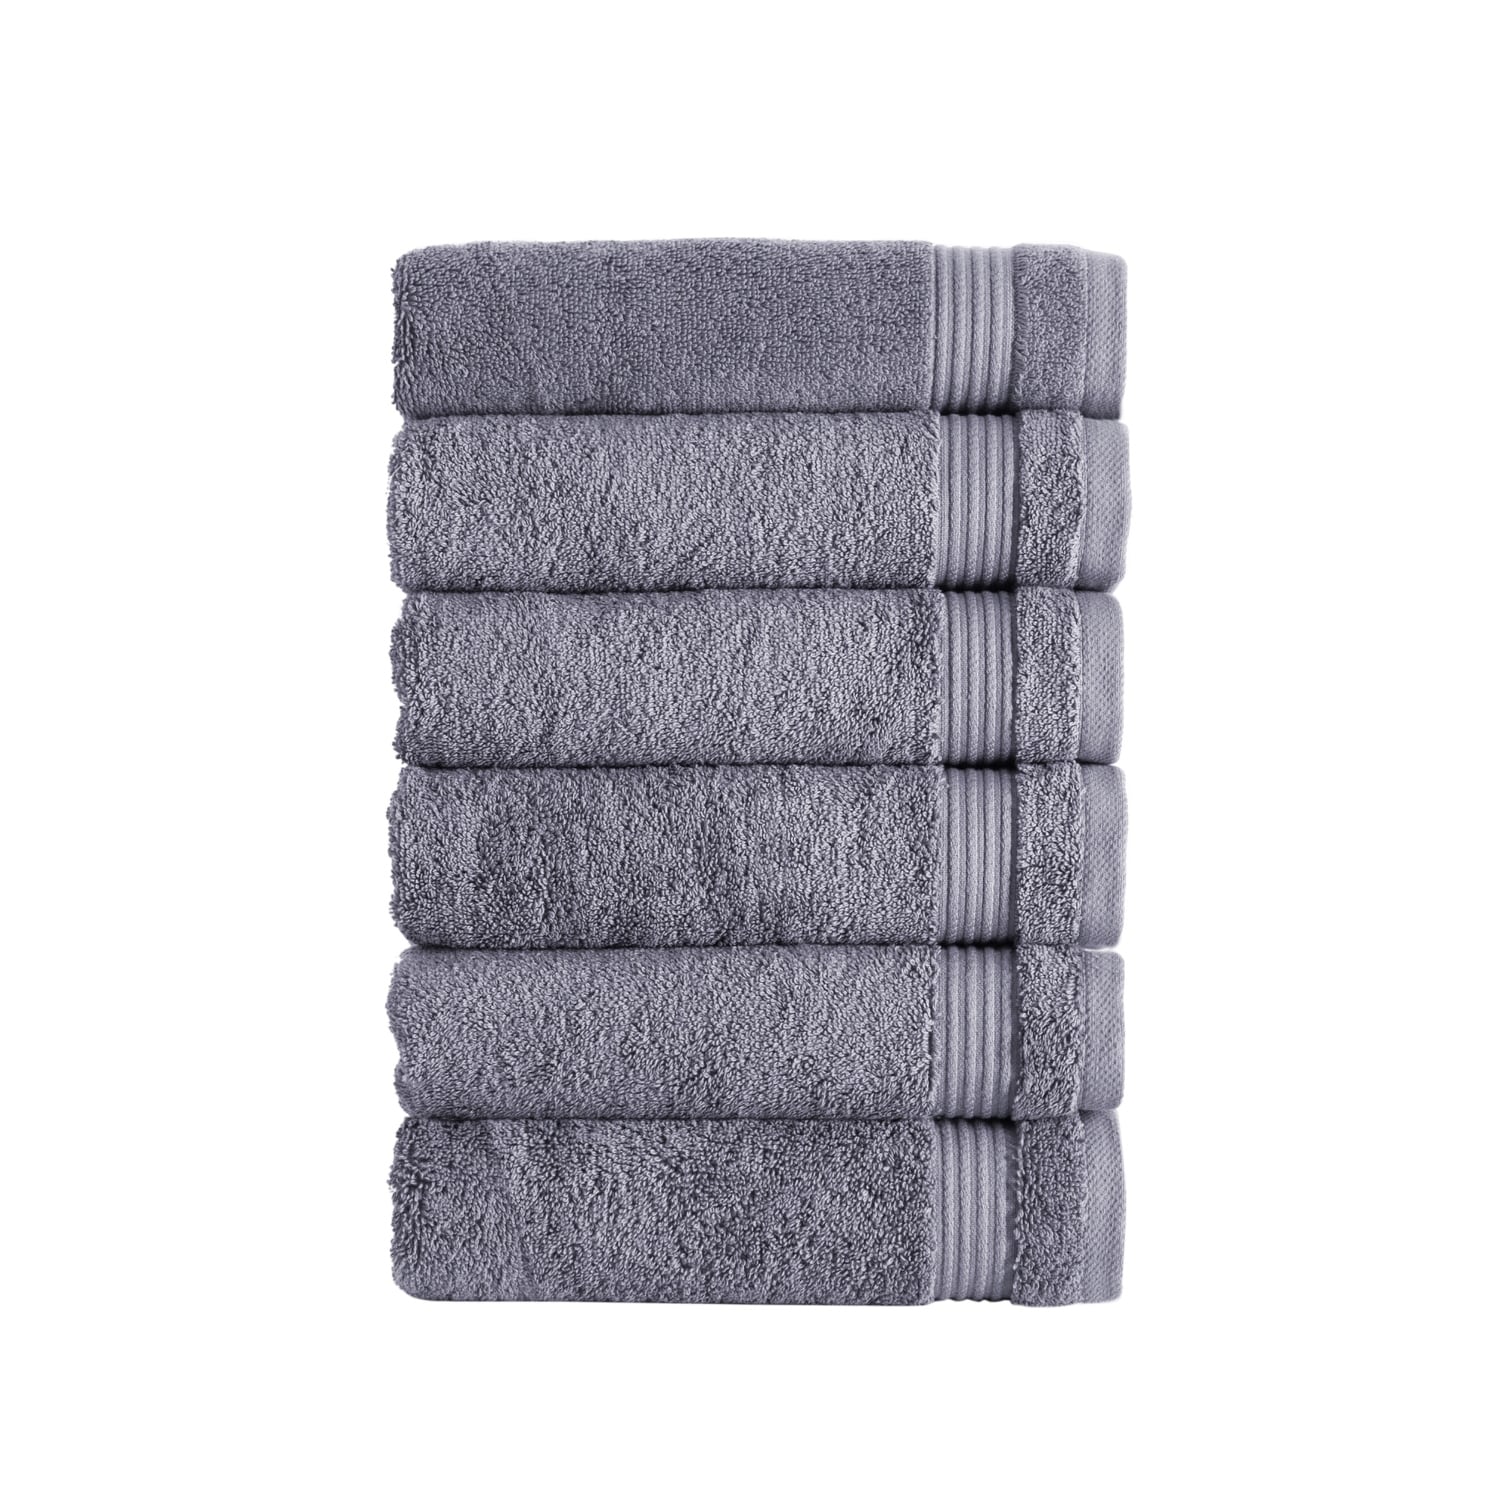 Classic Turkish Towels - Hotel Bath Towels, 100% Turkish Cotton, Thick and  Absorbent Bathroom Towels, Arsenal Collection, 4-Piece Set - 27 x 54 Inches